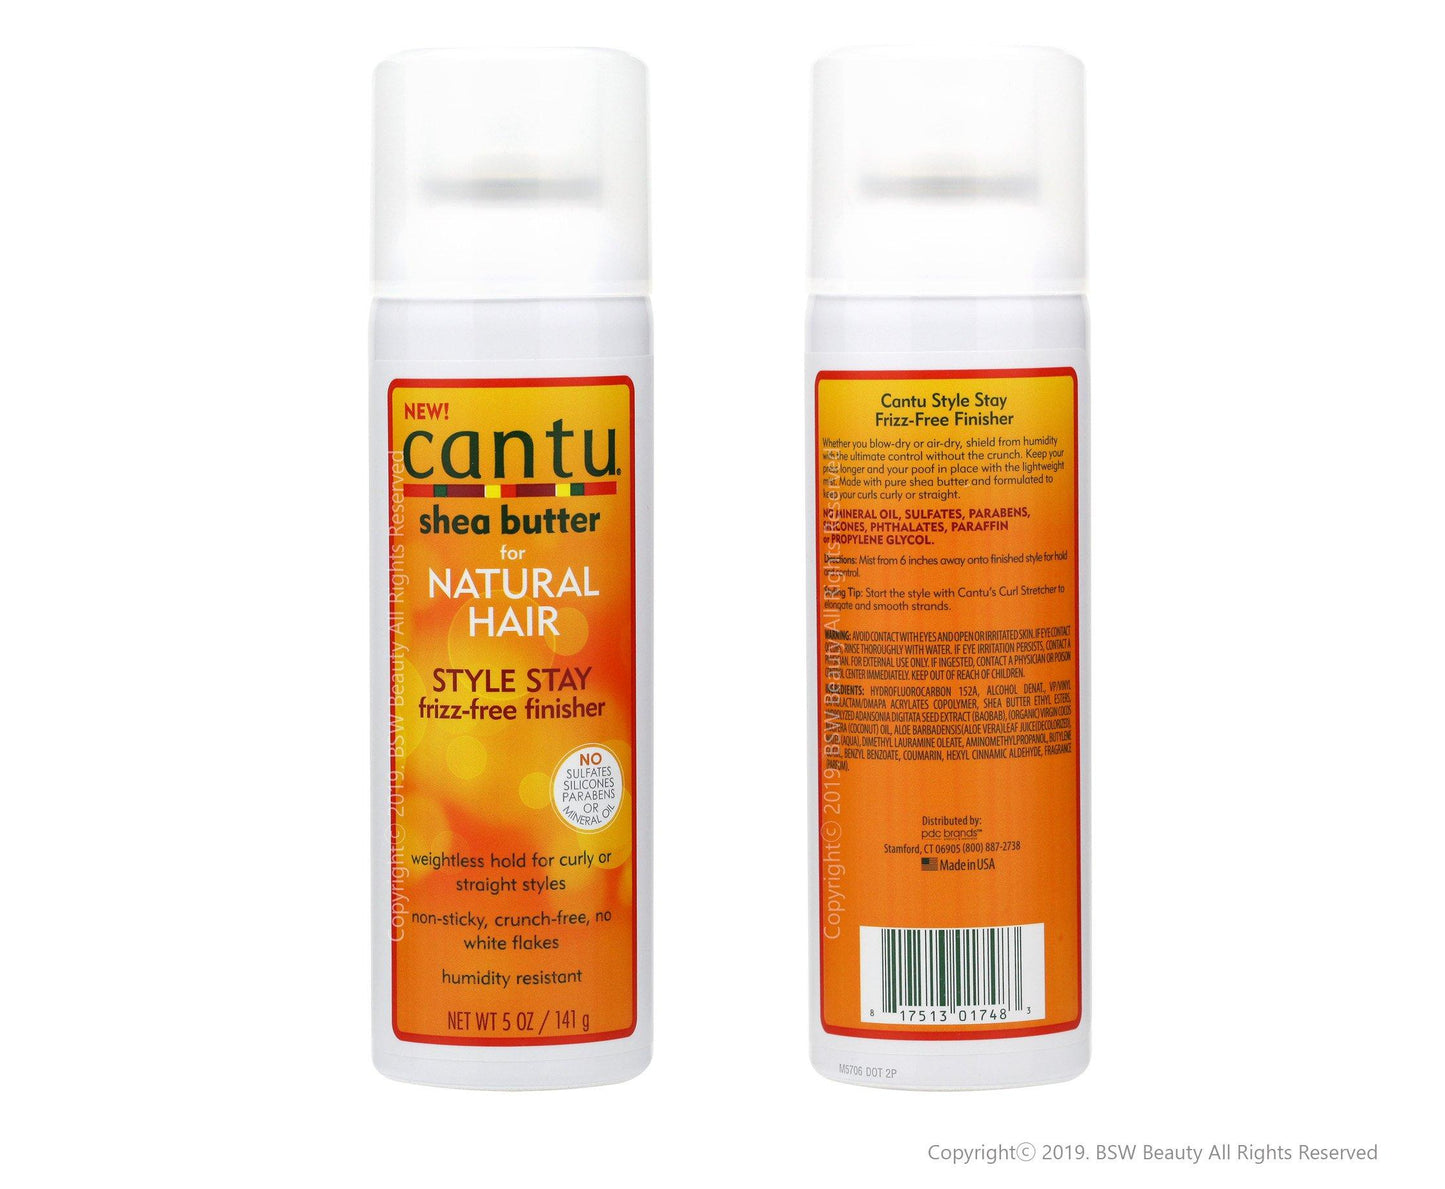 Cantu Shea Butter for Natural Hair Style Stay Frizz Free Finisher 5 oz